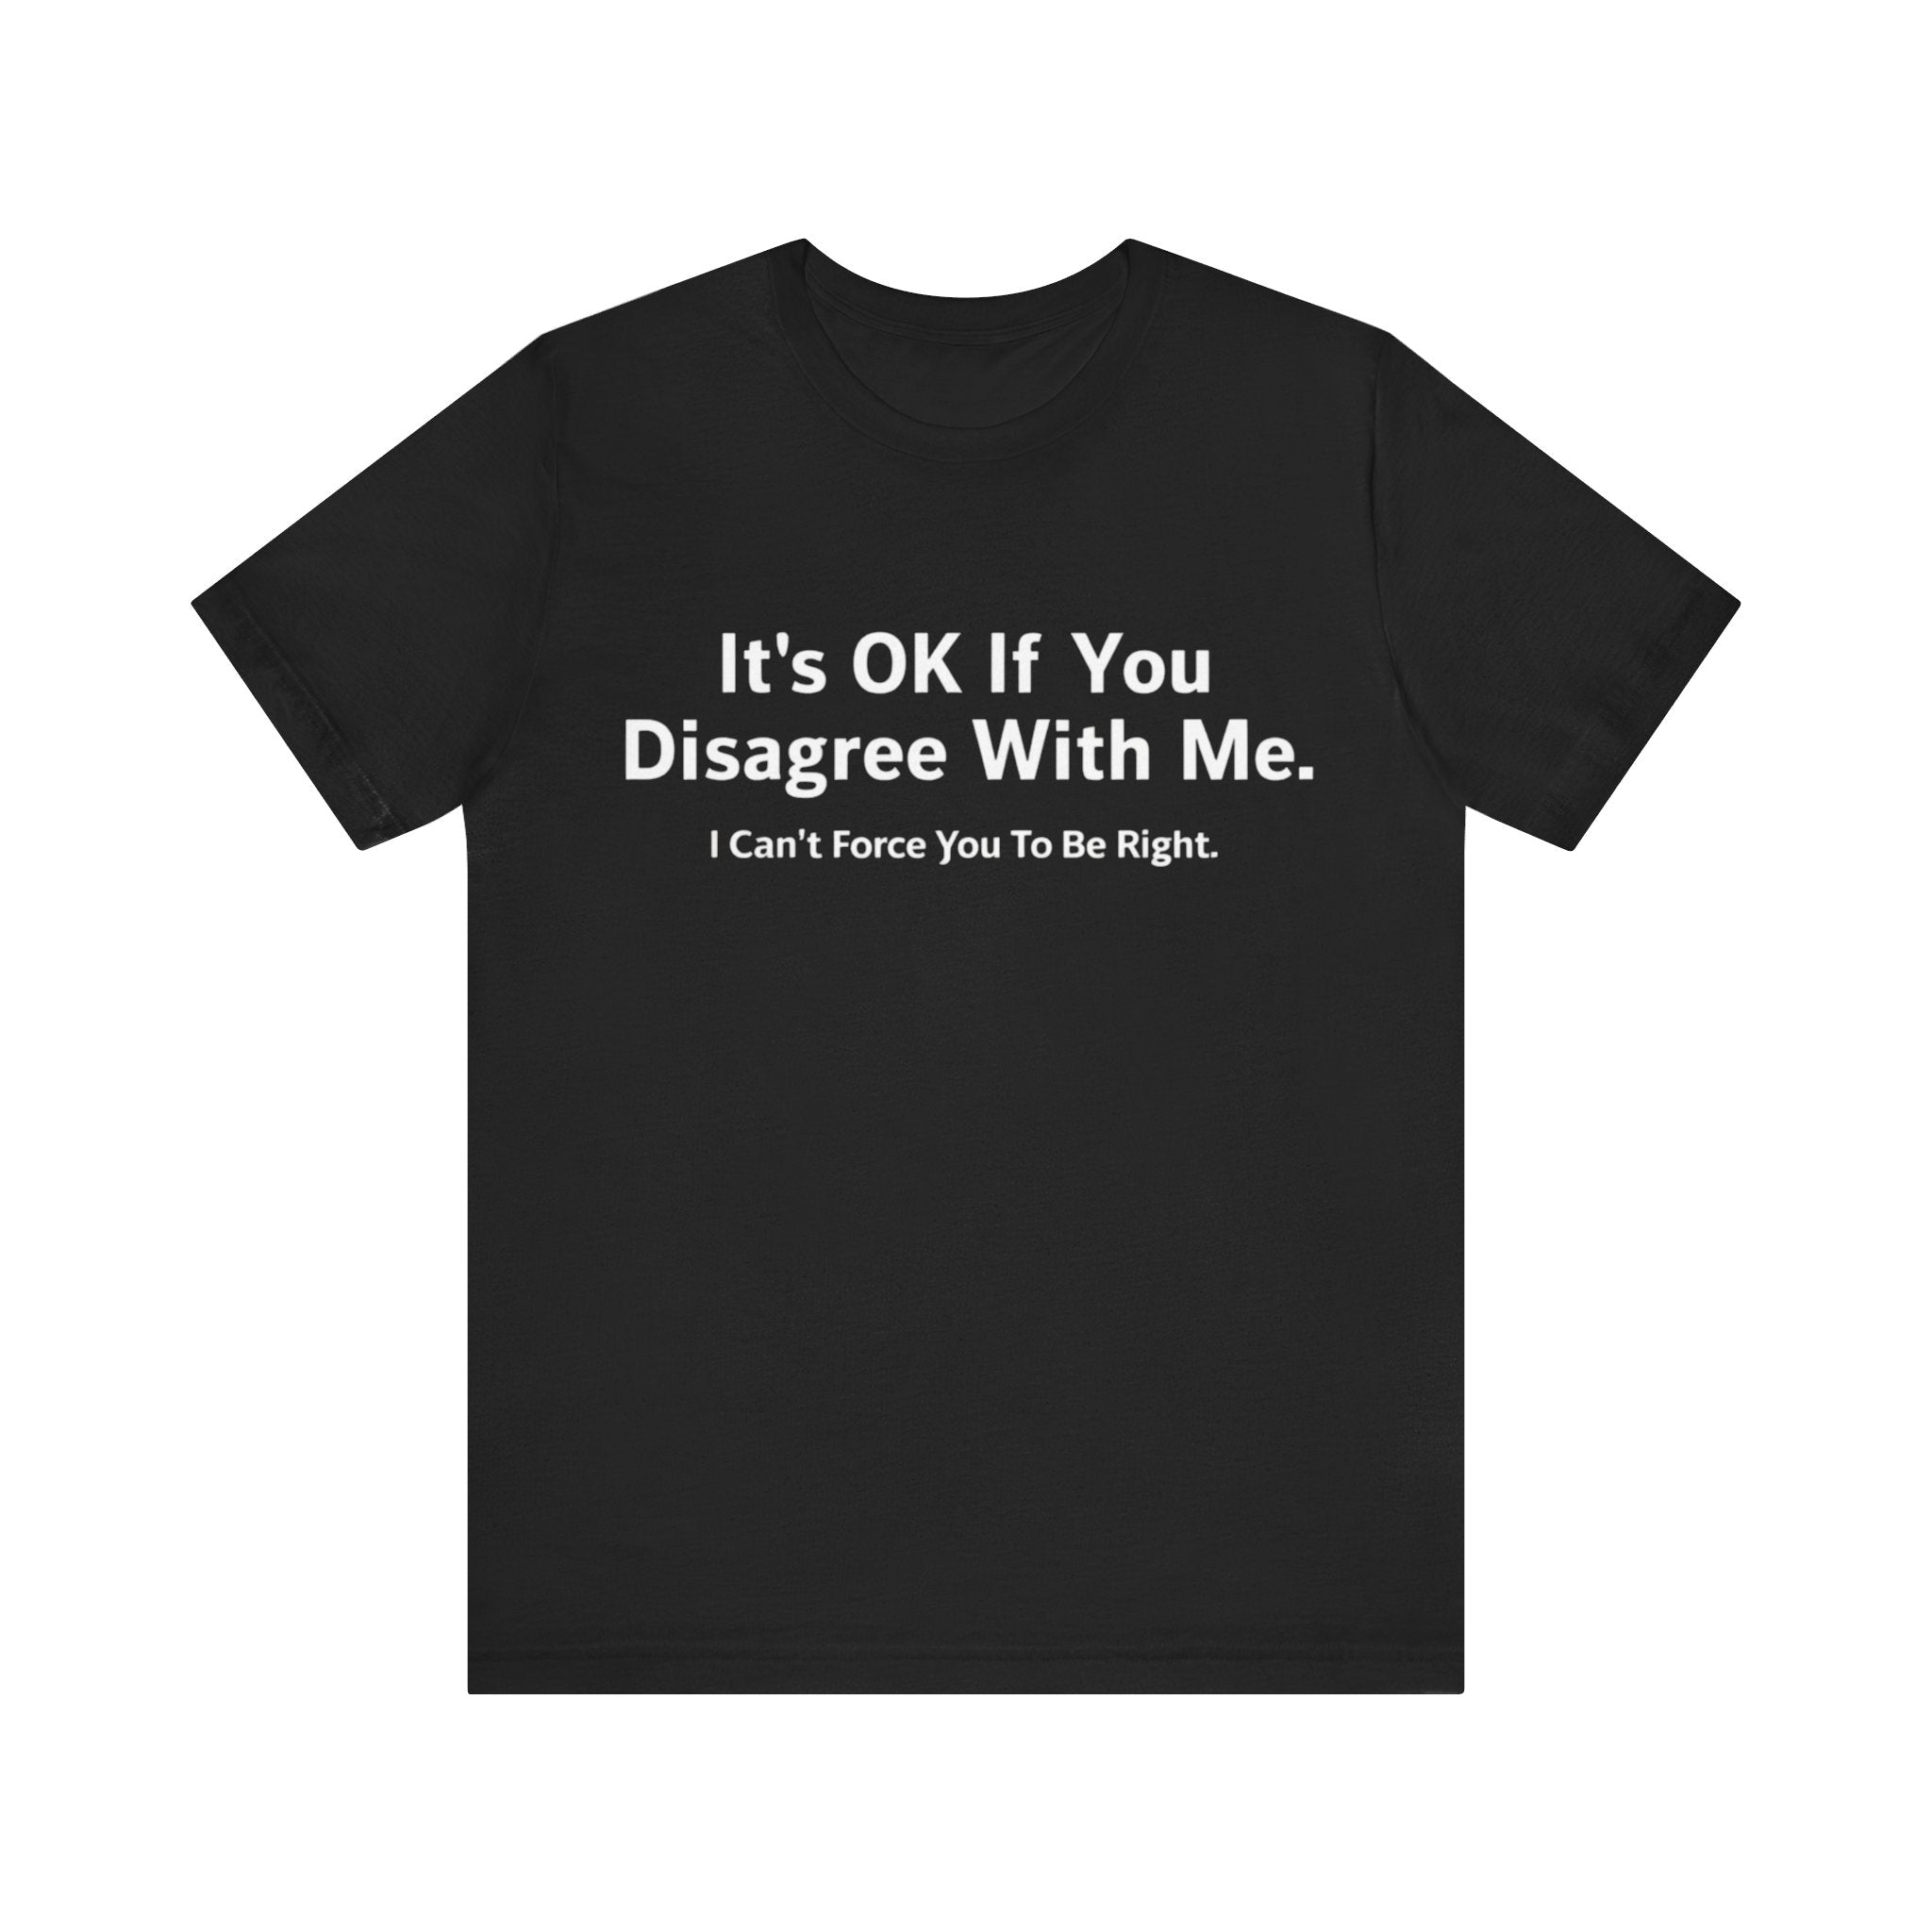 It's Ok If You Disagree With Me - T-Shirt